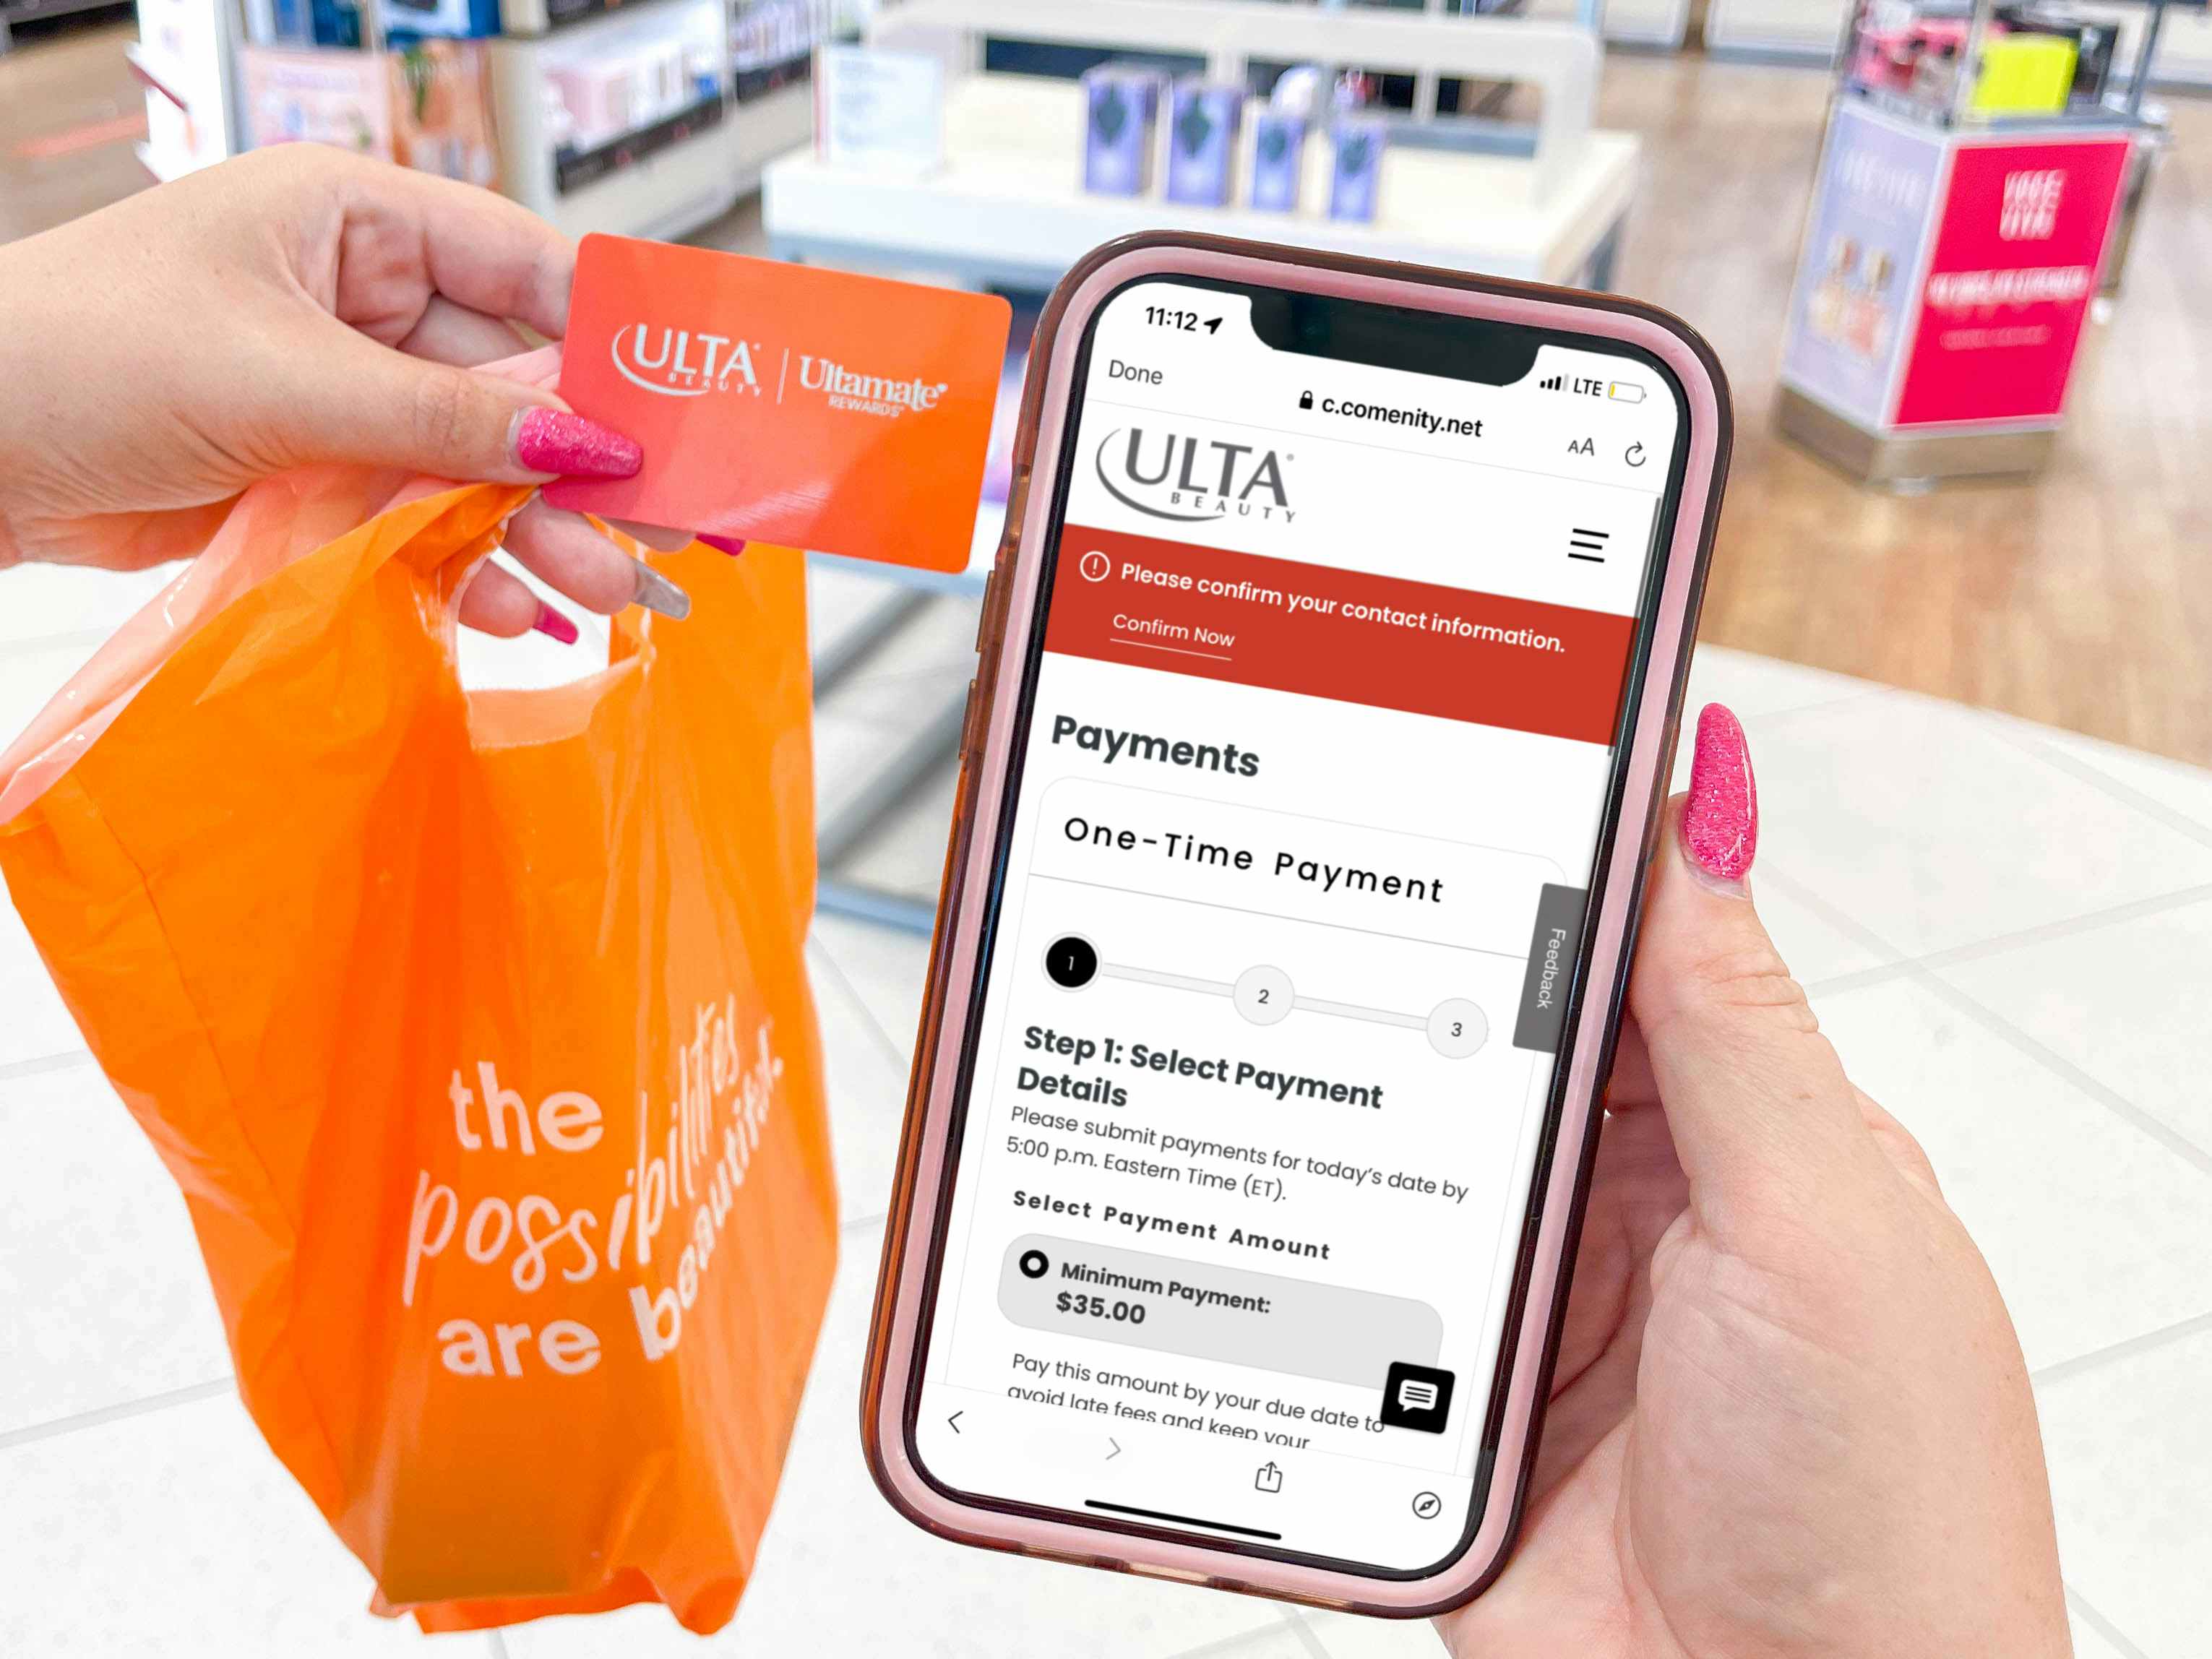 a woman holding a ulta bag and ulta credit card and a cellphone with app to make a payment